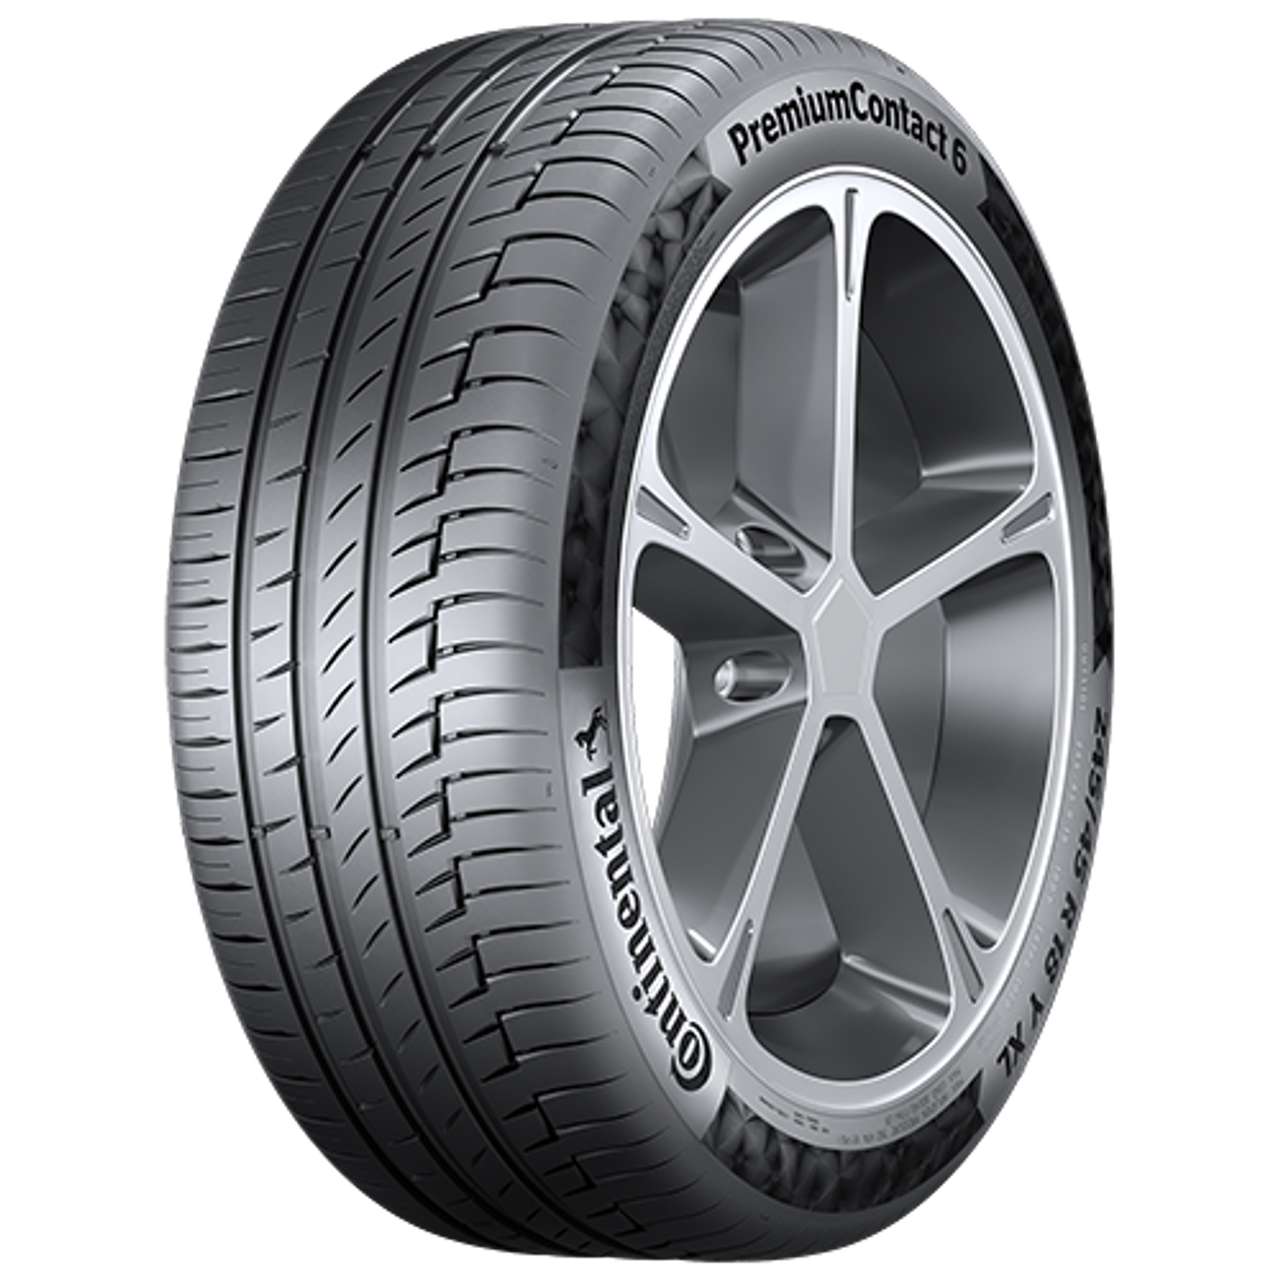 CONTINENTAL PREMIUMCONTACT 6 (AO) (EVc) 265/45R21 108H CONTISILENT FR BSW von Continental